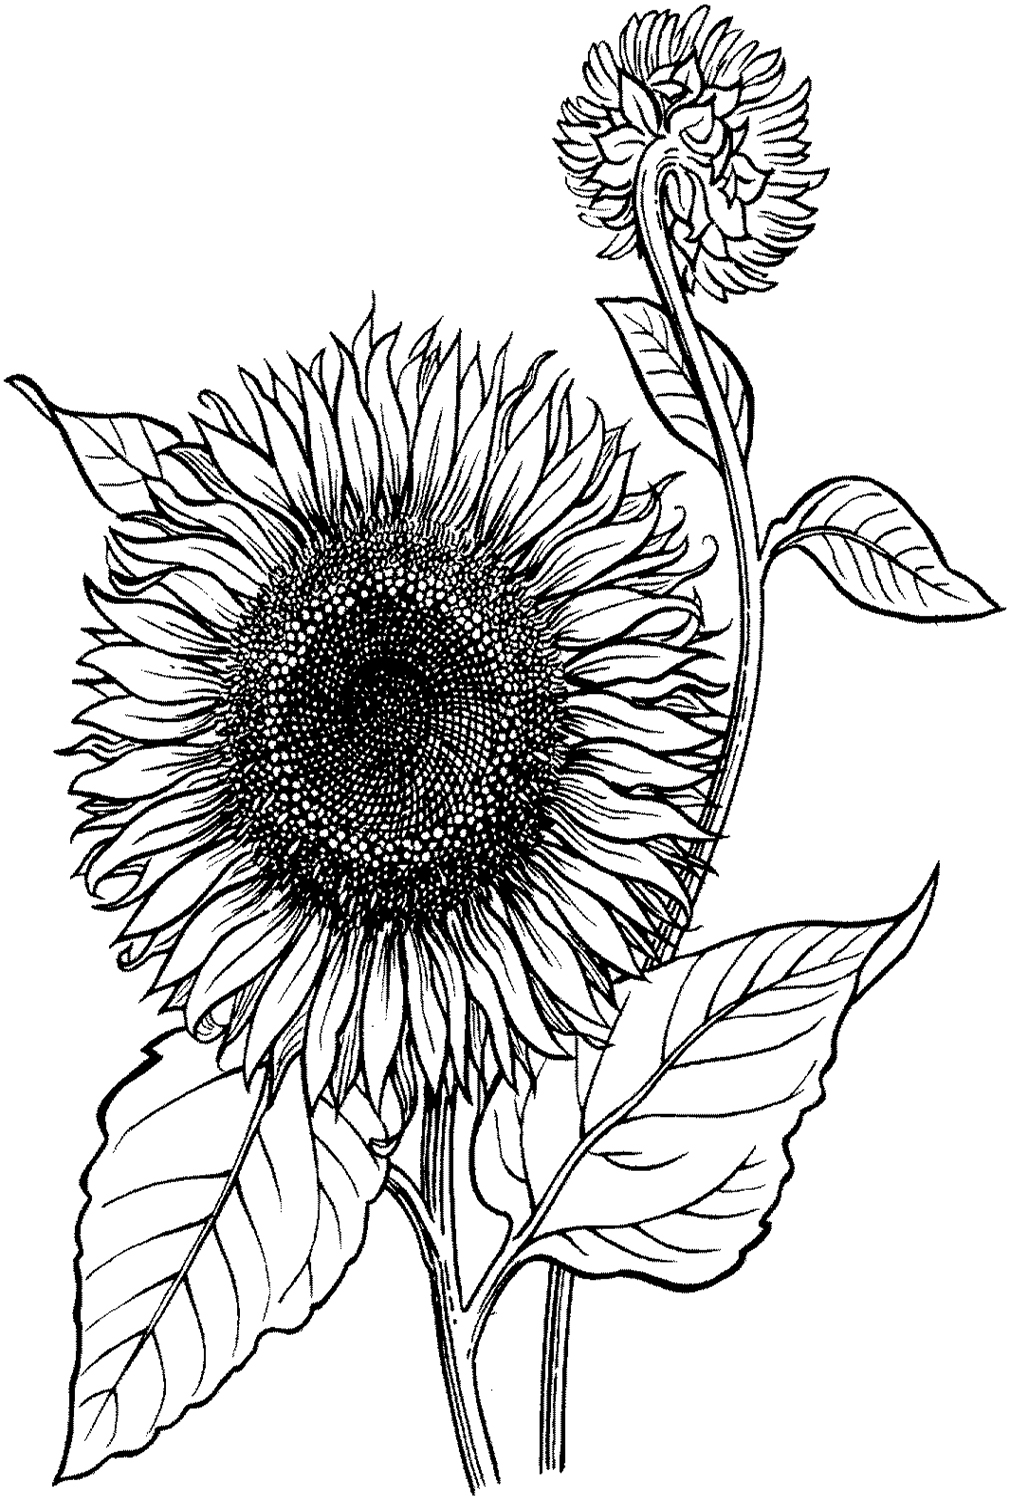 Blooming Sunflower Coloring Pages